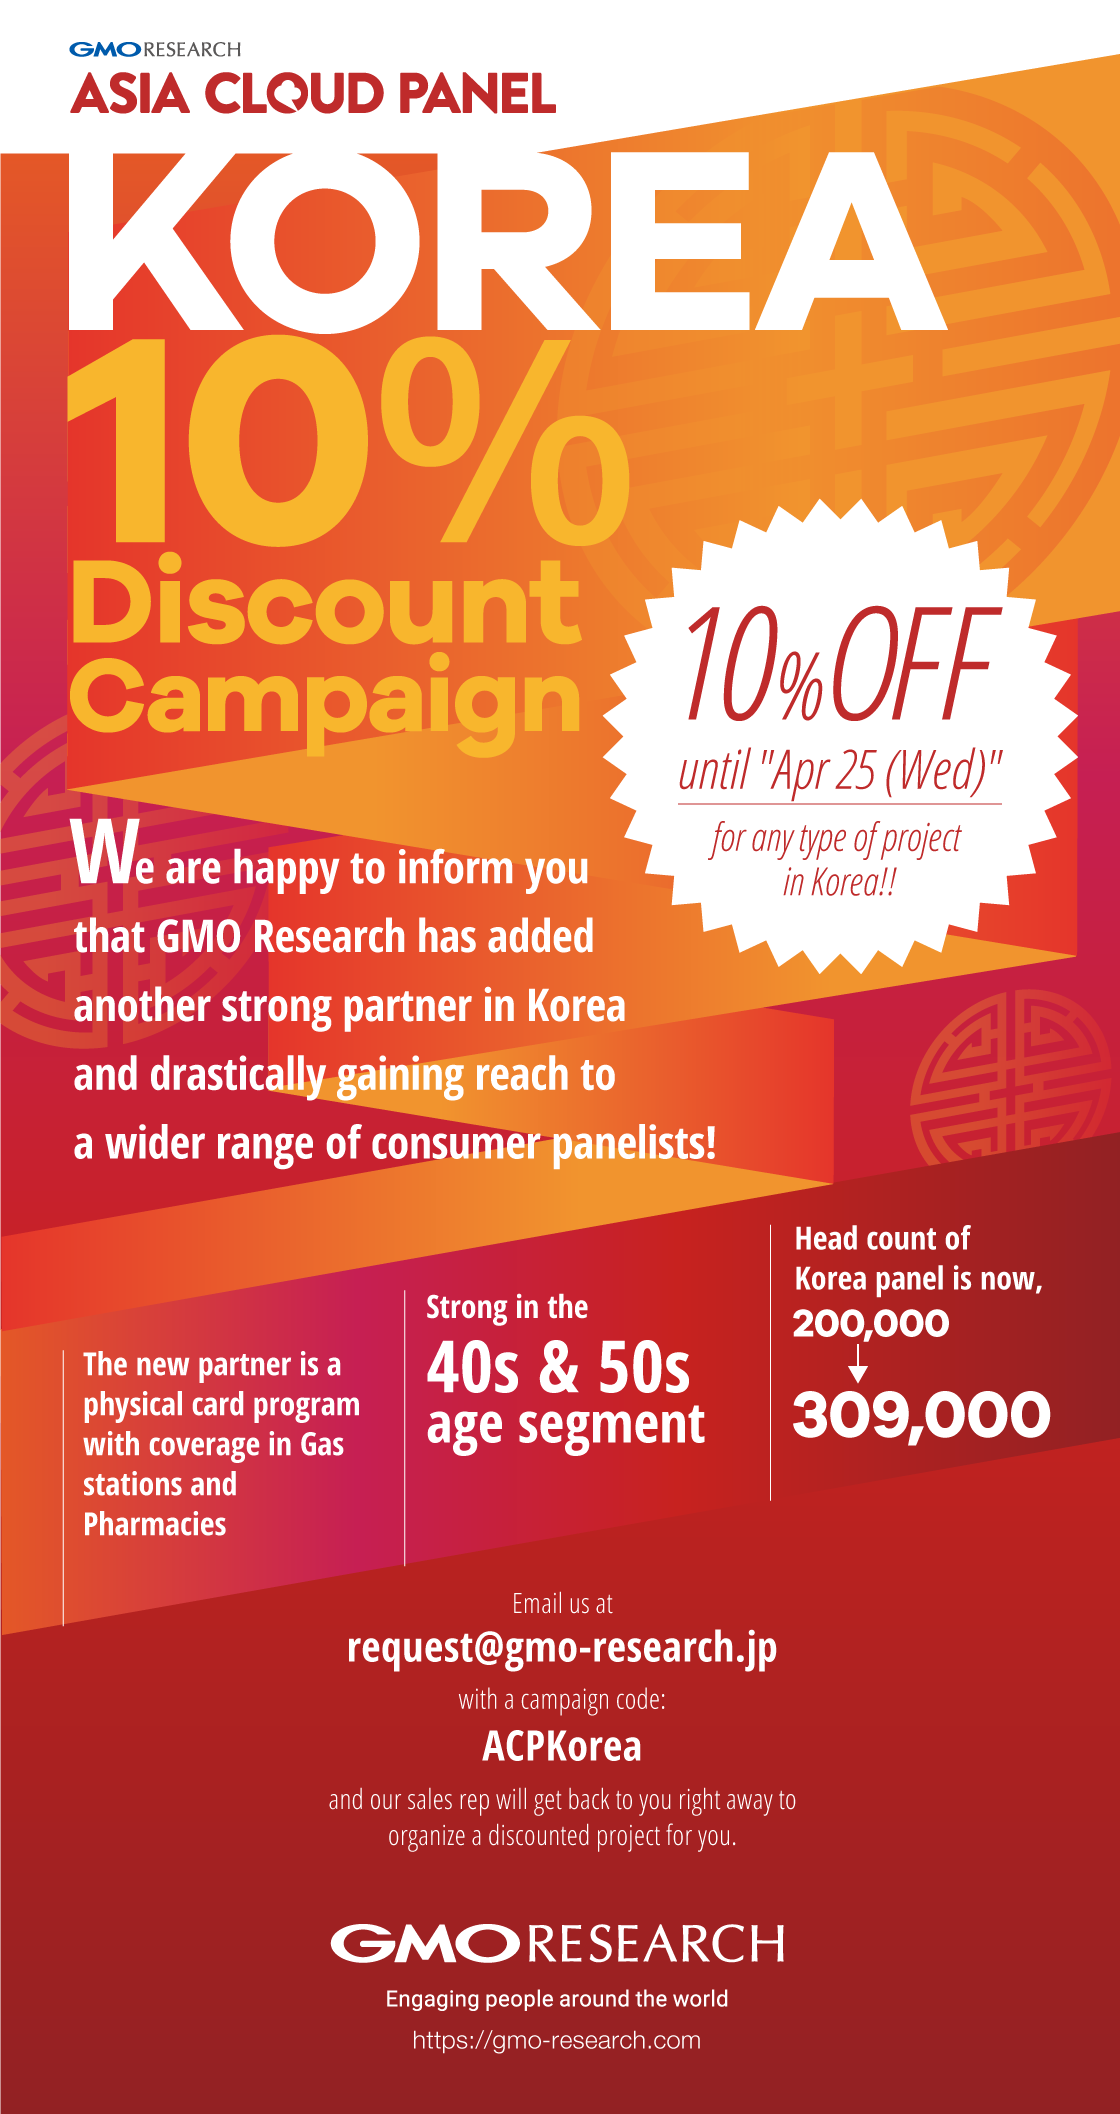 KOREA Panel -10% Campaign just launched!